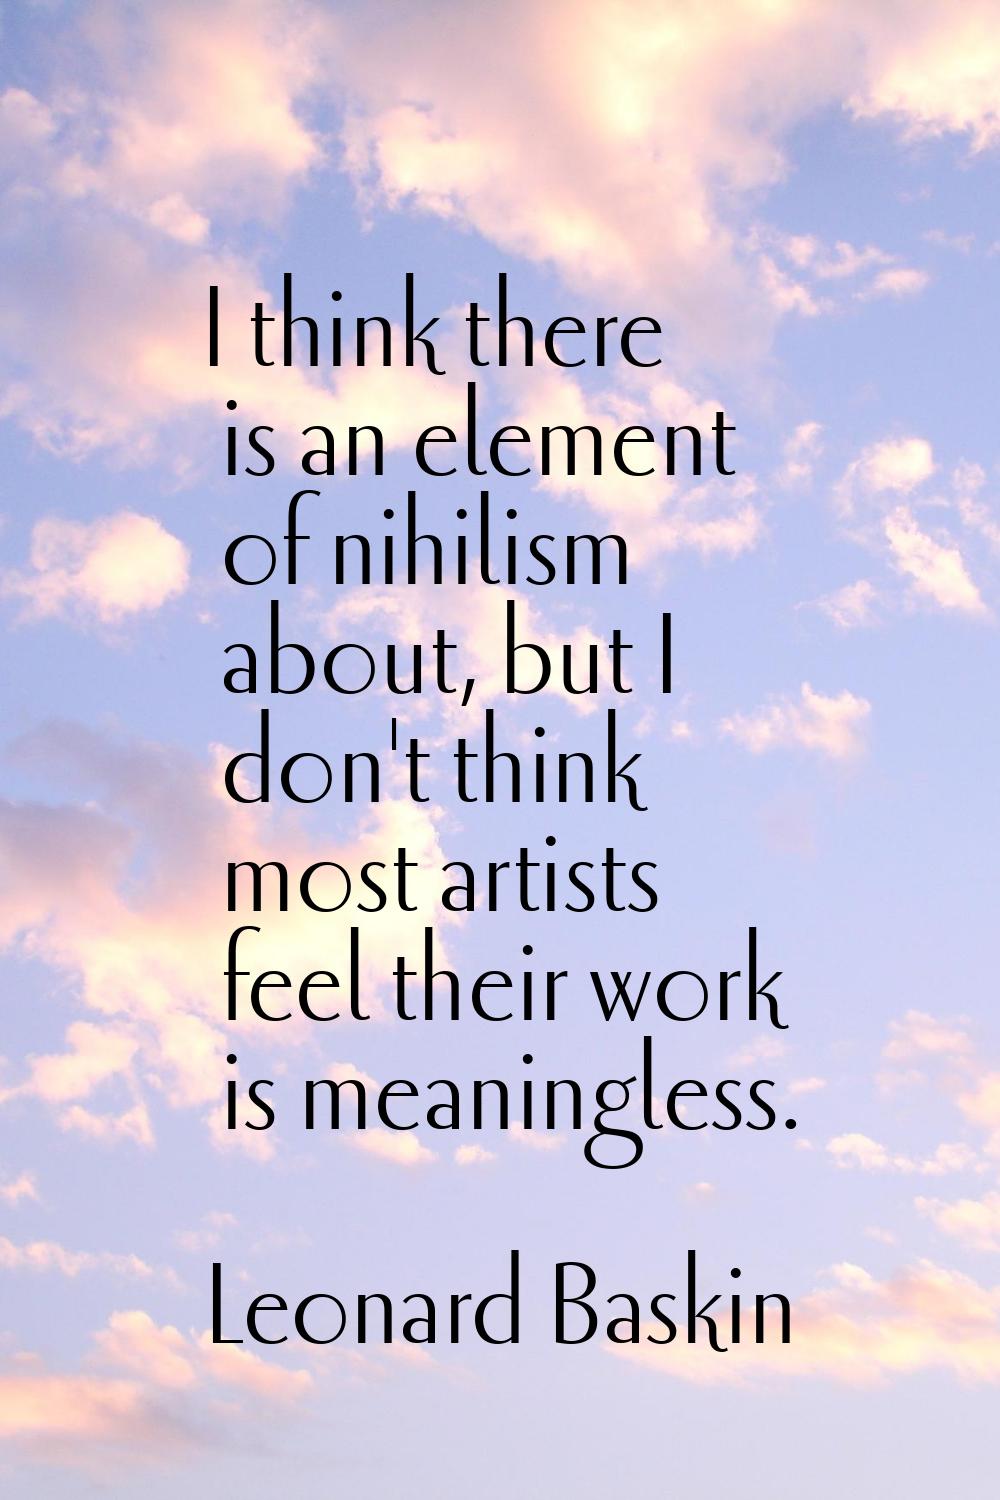 I think there is an element of nihilism about, but I don't think most artists feel their work is me